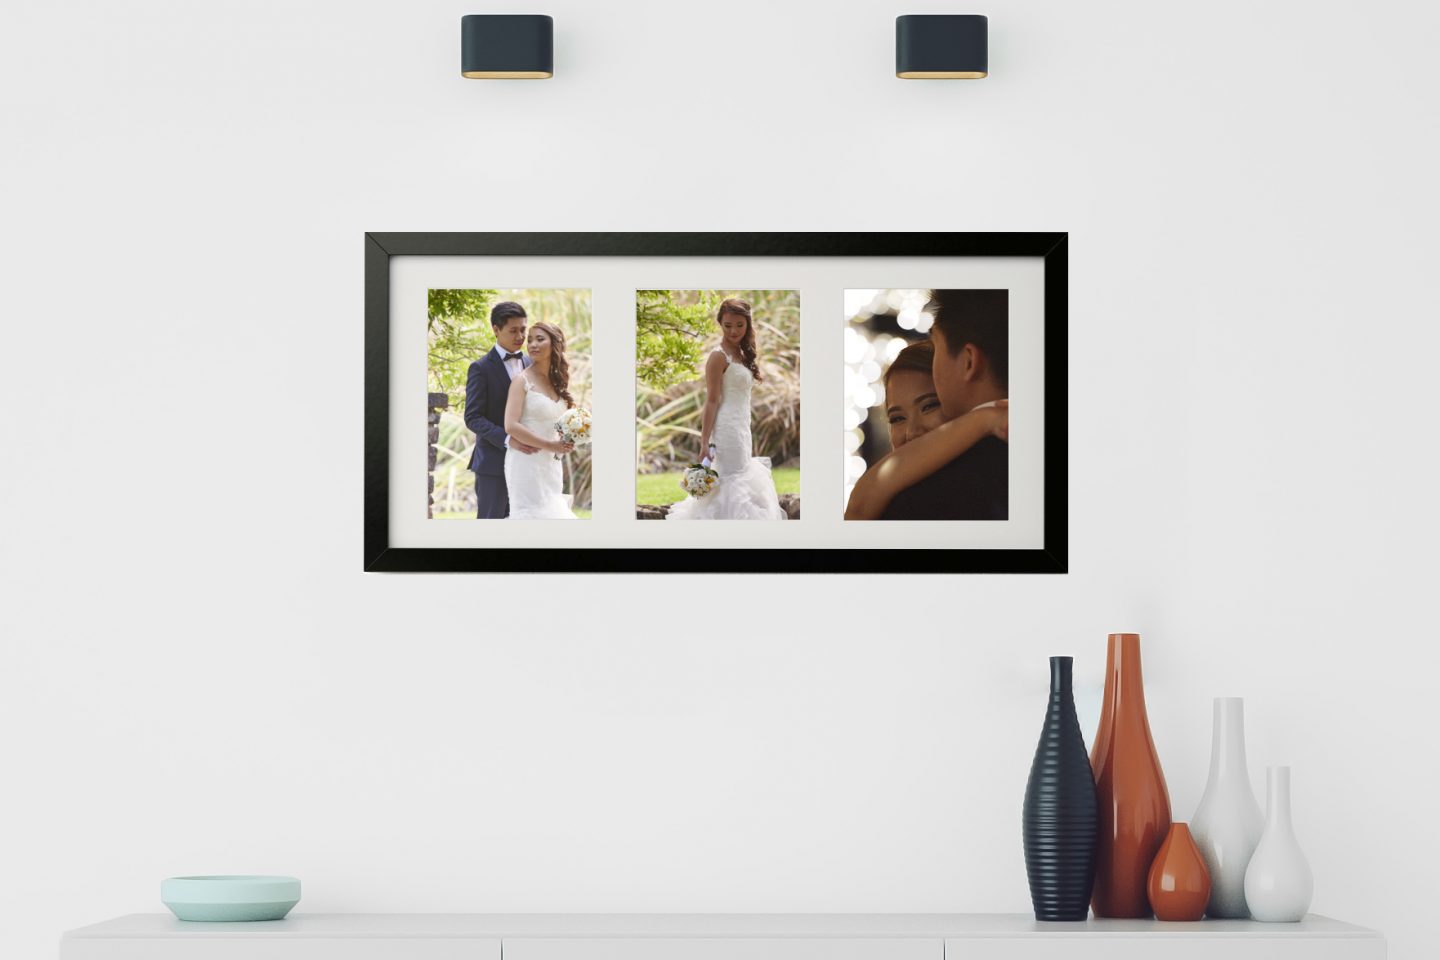 Signature framed prints from Evoke Eternity are ready to hang, turning your house into your home